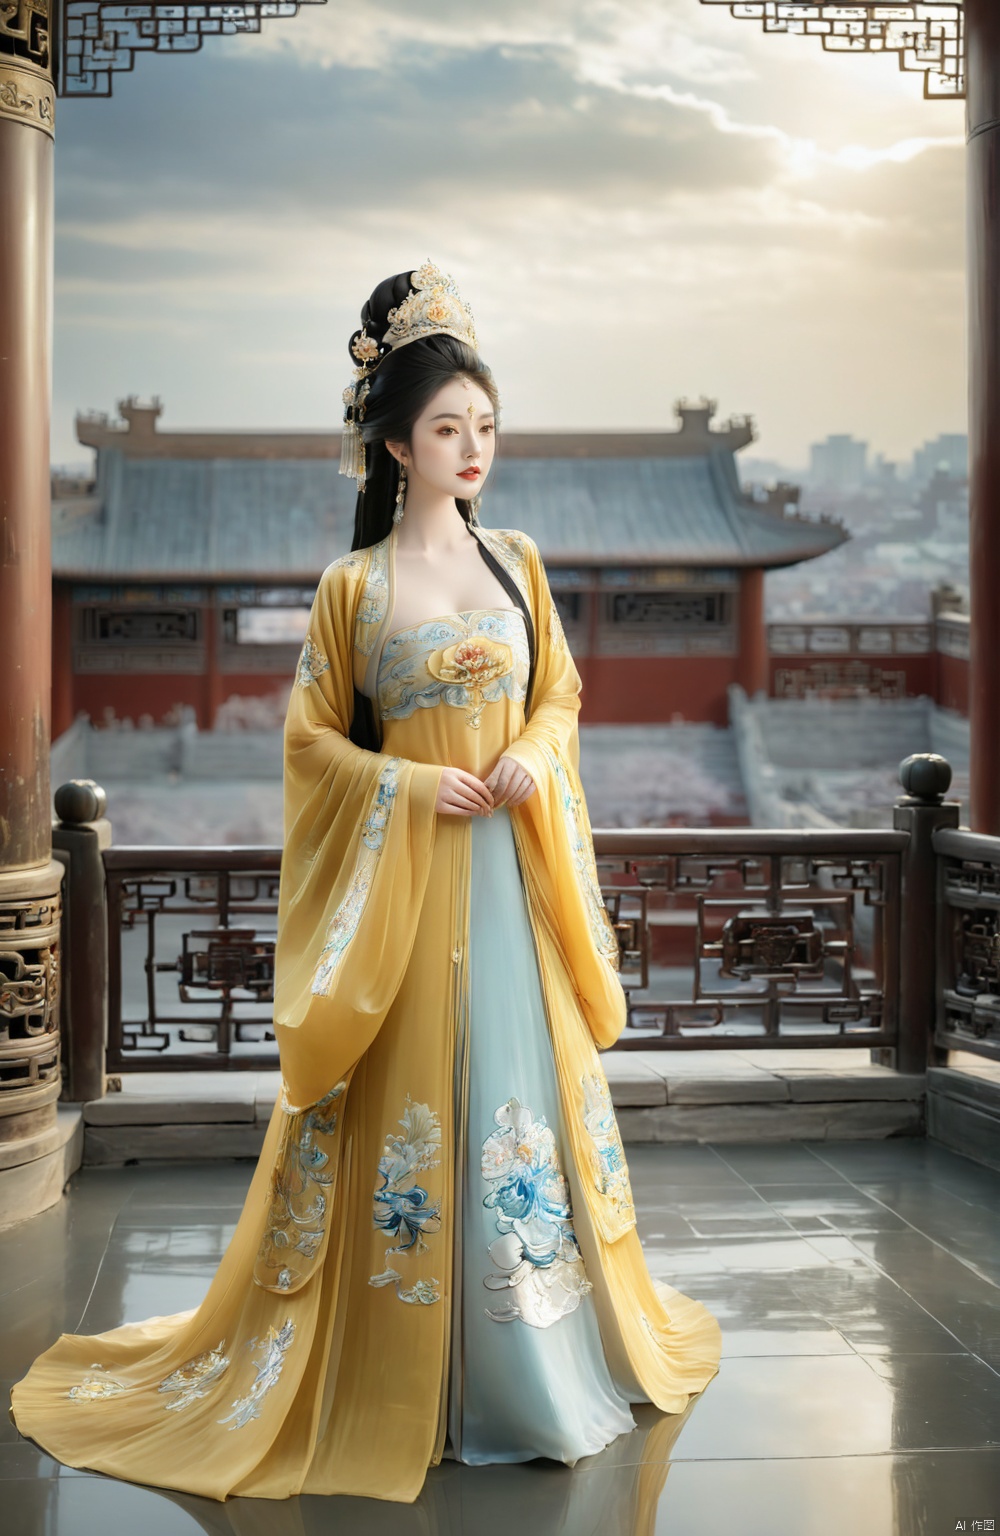 1girl,full body,cloudy_sky,scenery,architecture,horizon,pillar,solo,look at the audience,long_hair,Golden Embroidered Chinese Princess Dress,elegant and graceful beauty,A solitary girl stands regally, her full form gracing the scenery, embodying an elegant and graceful beauty. Dressed in a stunning Golden Embroidered Chinese Princess Dress, her long hair cascades down like a dark waterfall, framing her visage as she gazes directly at the audience. Her presence merges seamlessly with the cloudy sky and horizon, where billowy clouds drift overhead like celestial architecture, casting soft shadows against the pillar-like structures below. This enchanting blend of natural and architectural elements serves to accentuate her poise and allure, as if she herself were a part of the larger, breathtaking landscape.<lora:EMS-317135-EMS:0.800000>, <lora:EMS-322155-EMS:0.700000>